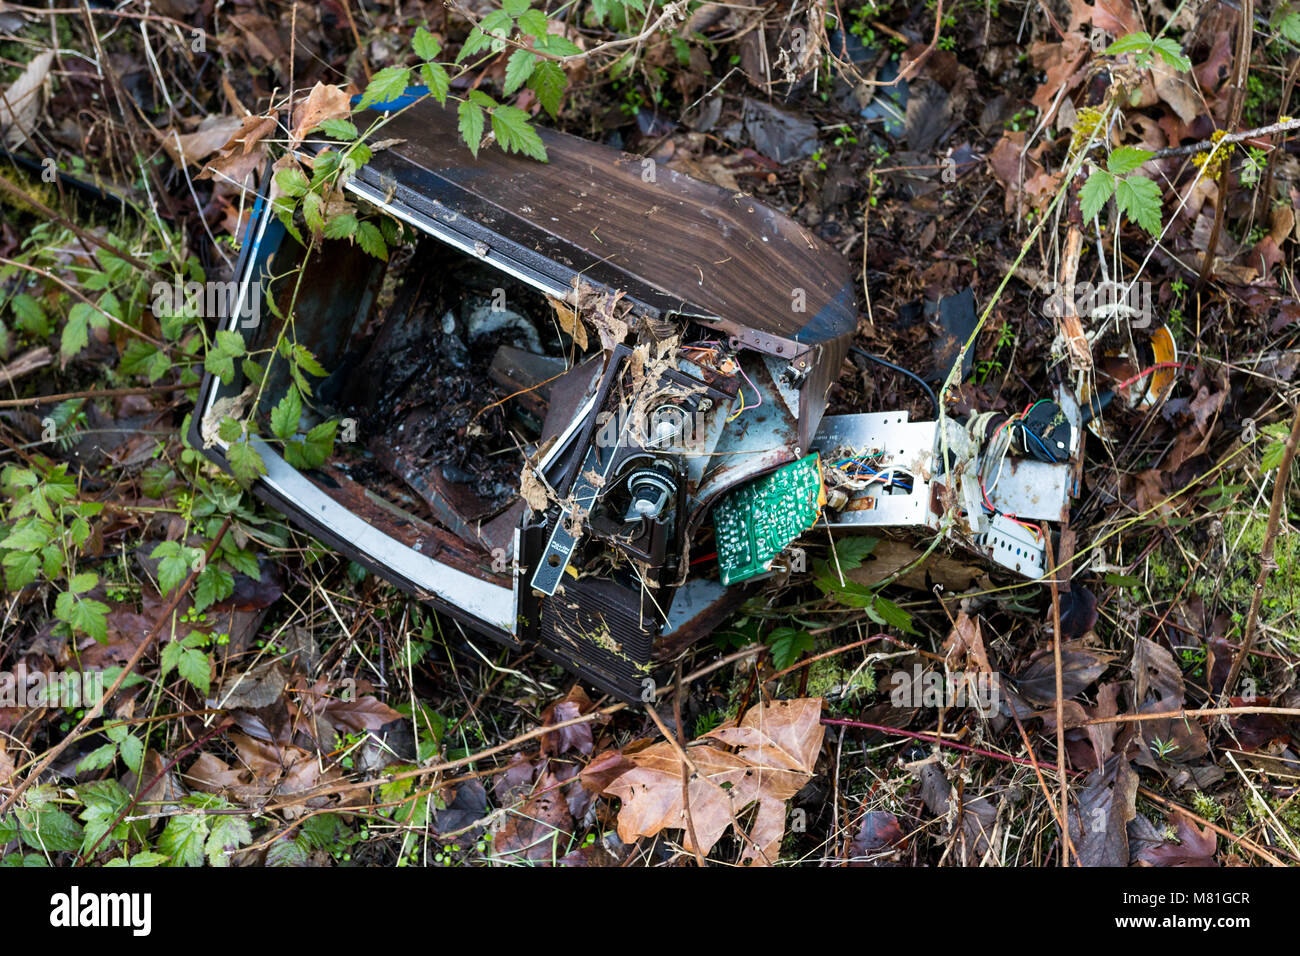 Dismantled smashed television set with plants and weeds growing in to the broken tube Stock Photo